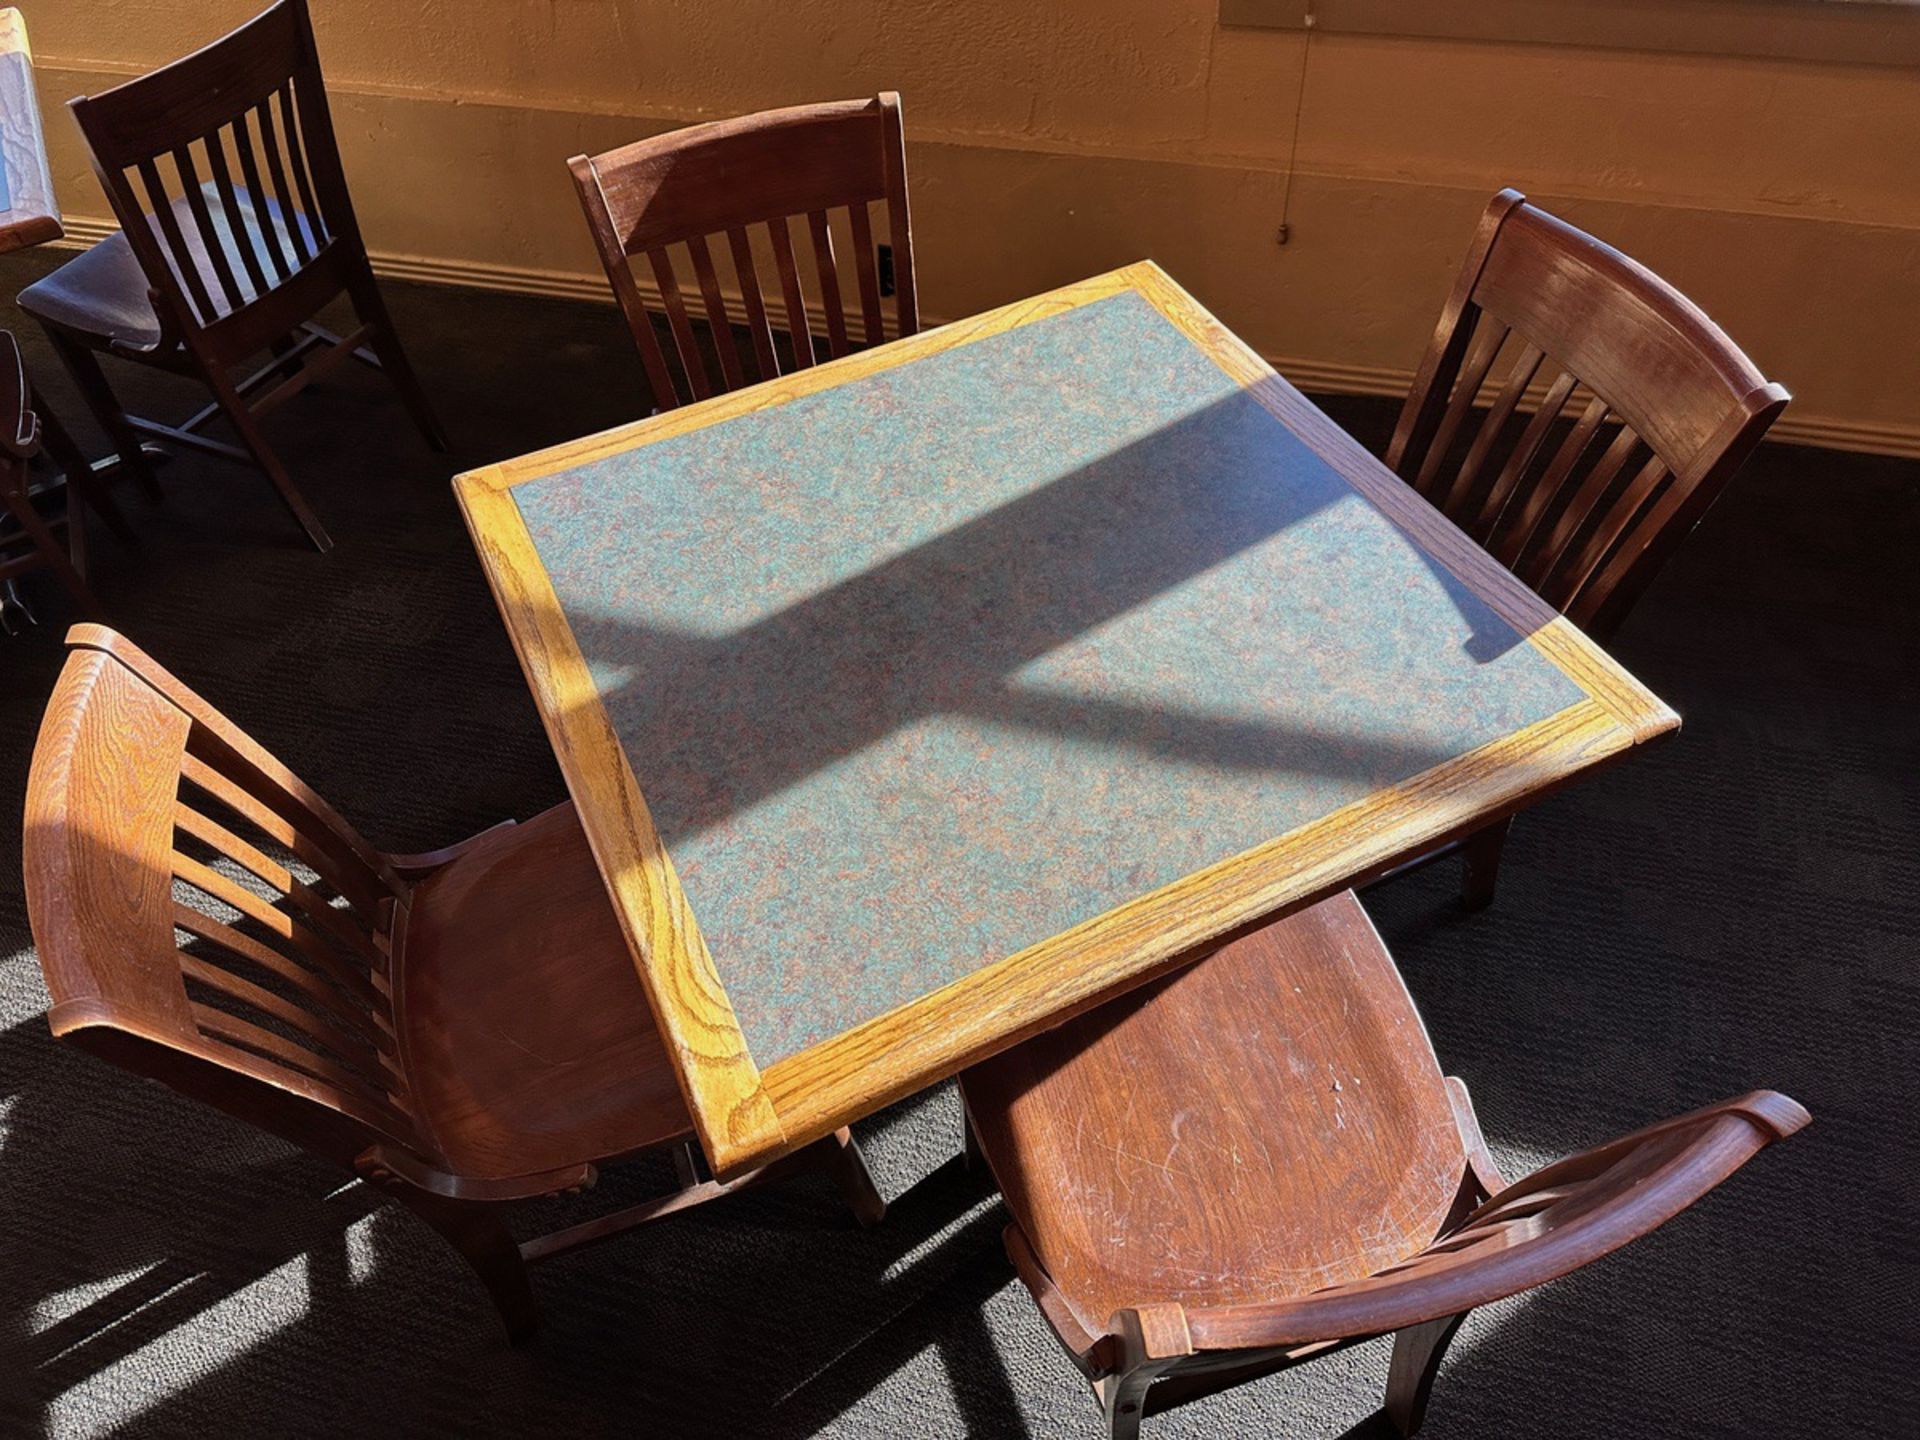 Lot of (14) 3' x 3' Lowtop Tables with (4) Chairs - Subj to Bulk | Rig Fee $75